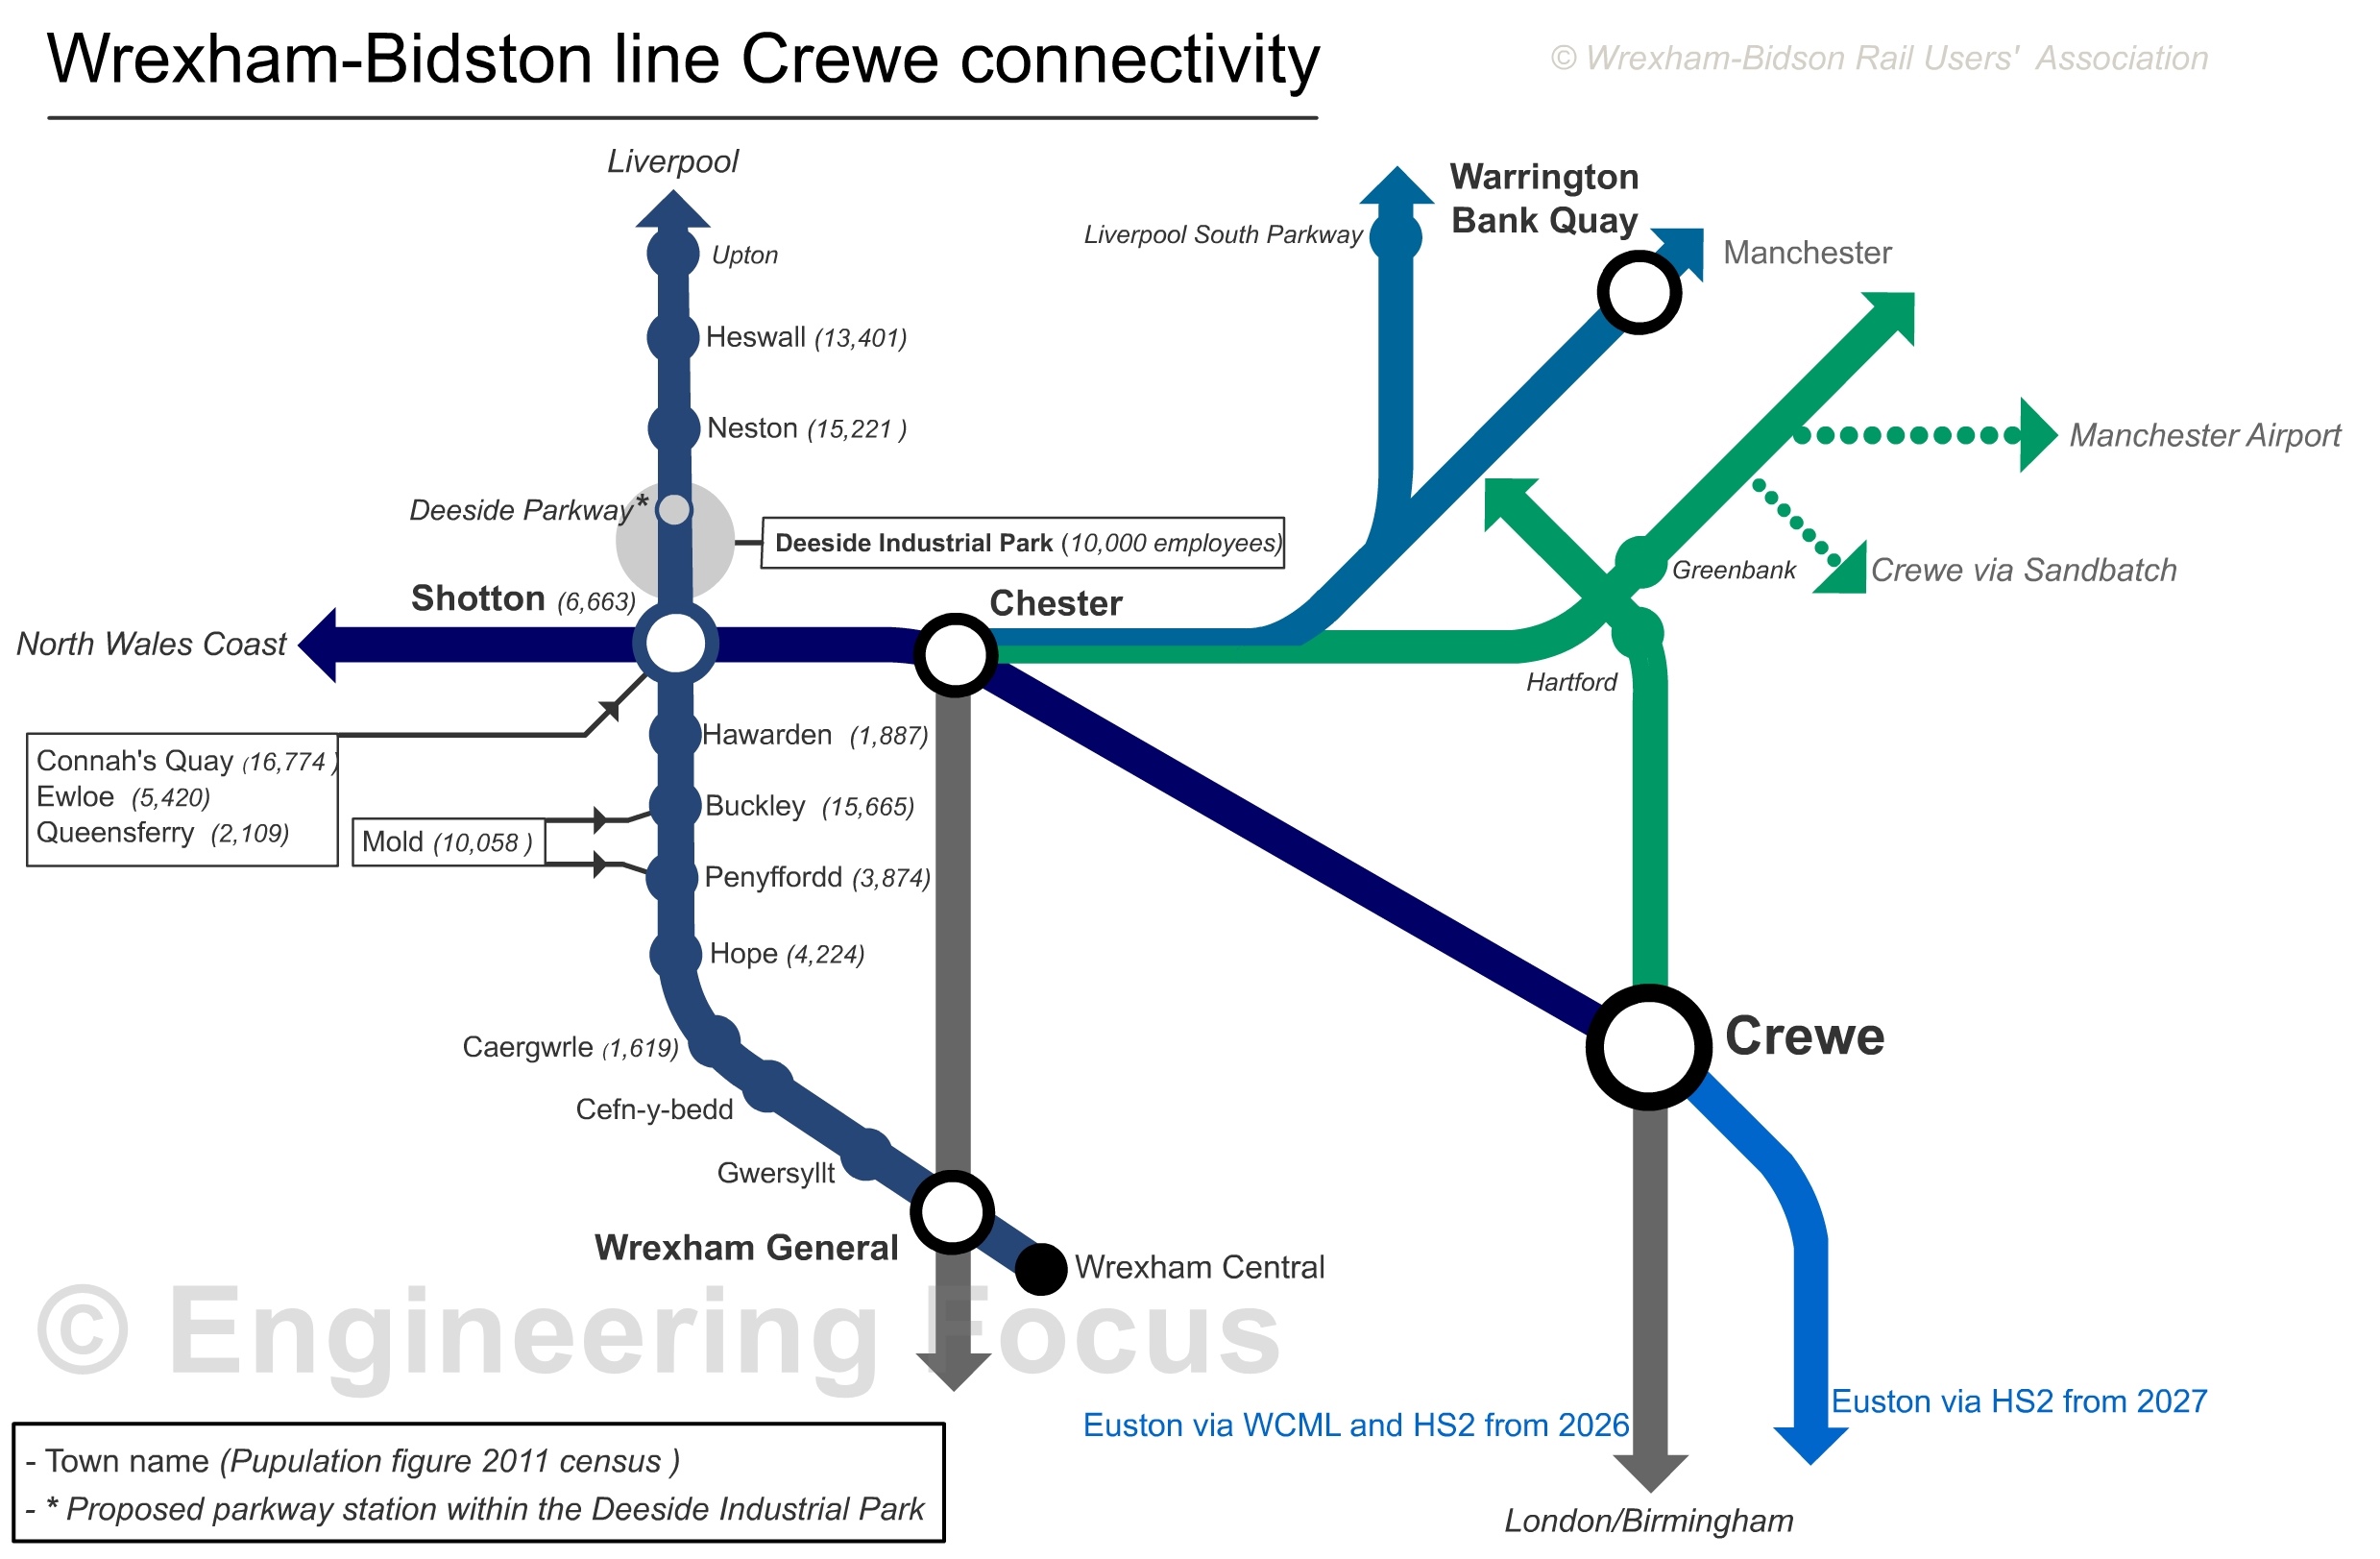 Crewe connectivity map created for the Wrexham-Bidston Rail Users' Association